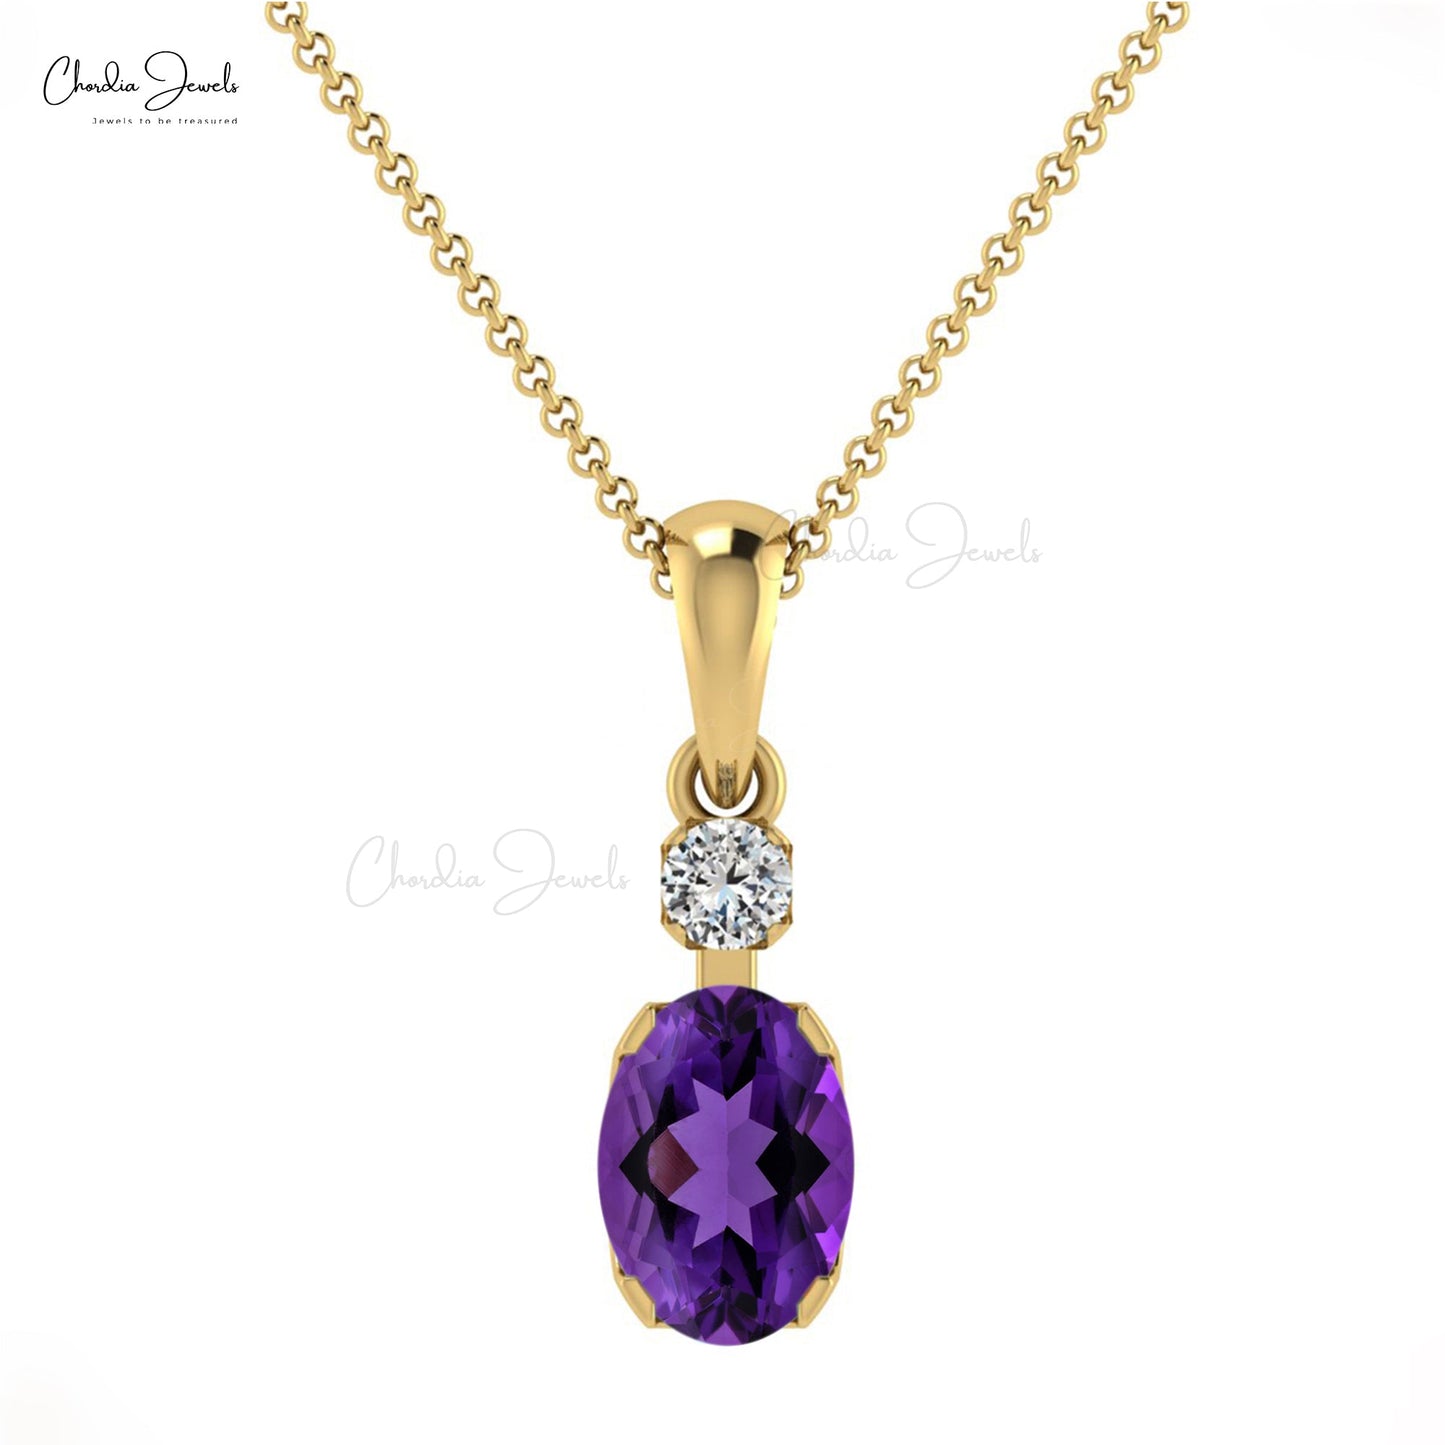 7x5mm Oval Faceted Natural Amethyst Pendant, 14k Solid Gold Diamond Pendant, February Birthstone Pendant Gift for Her